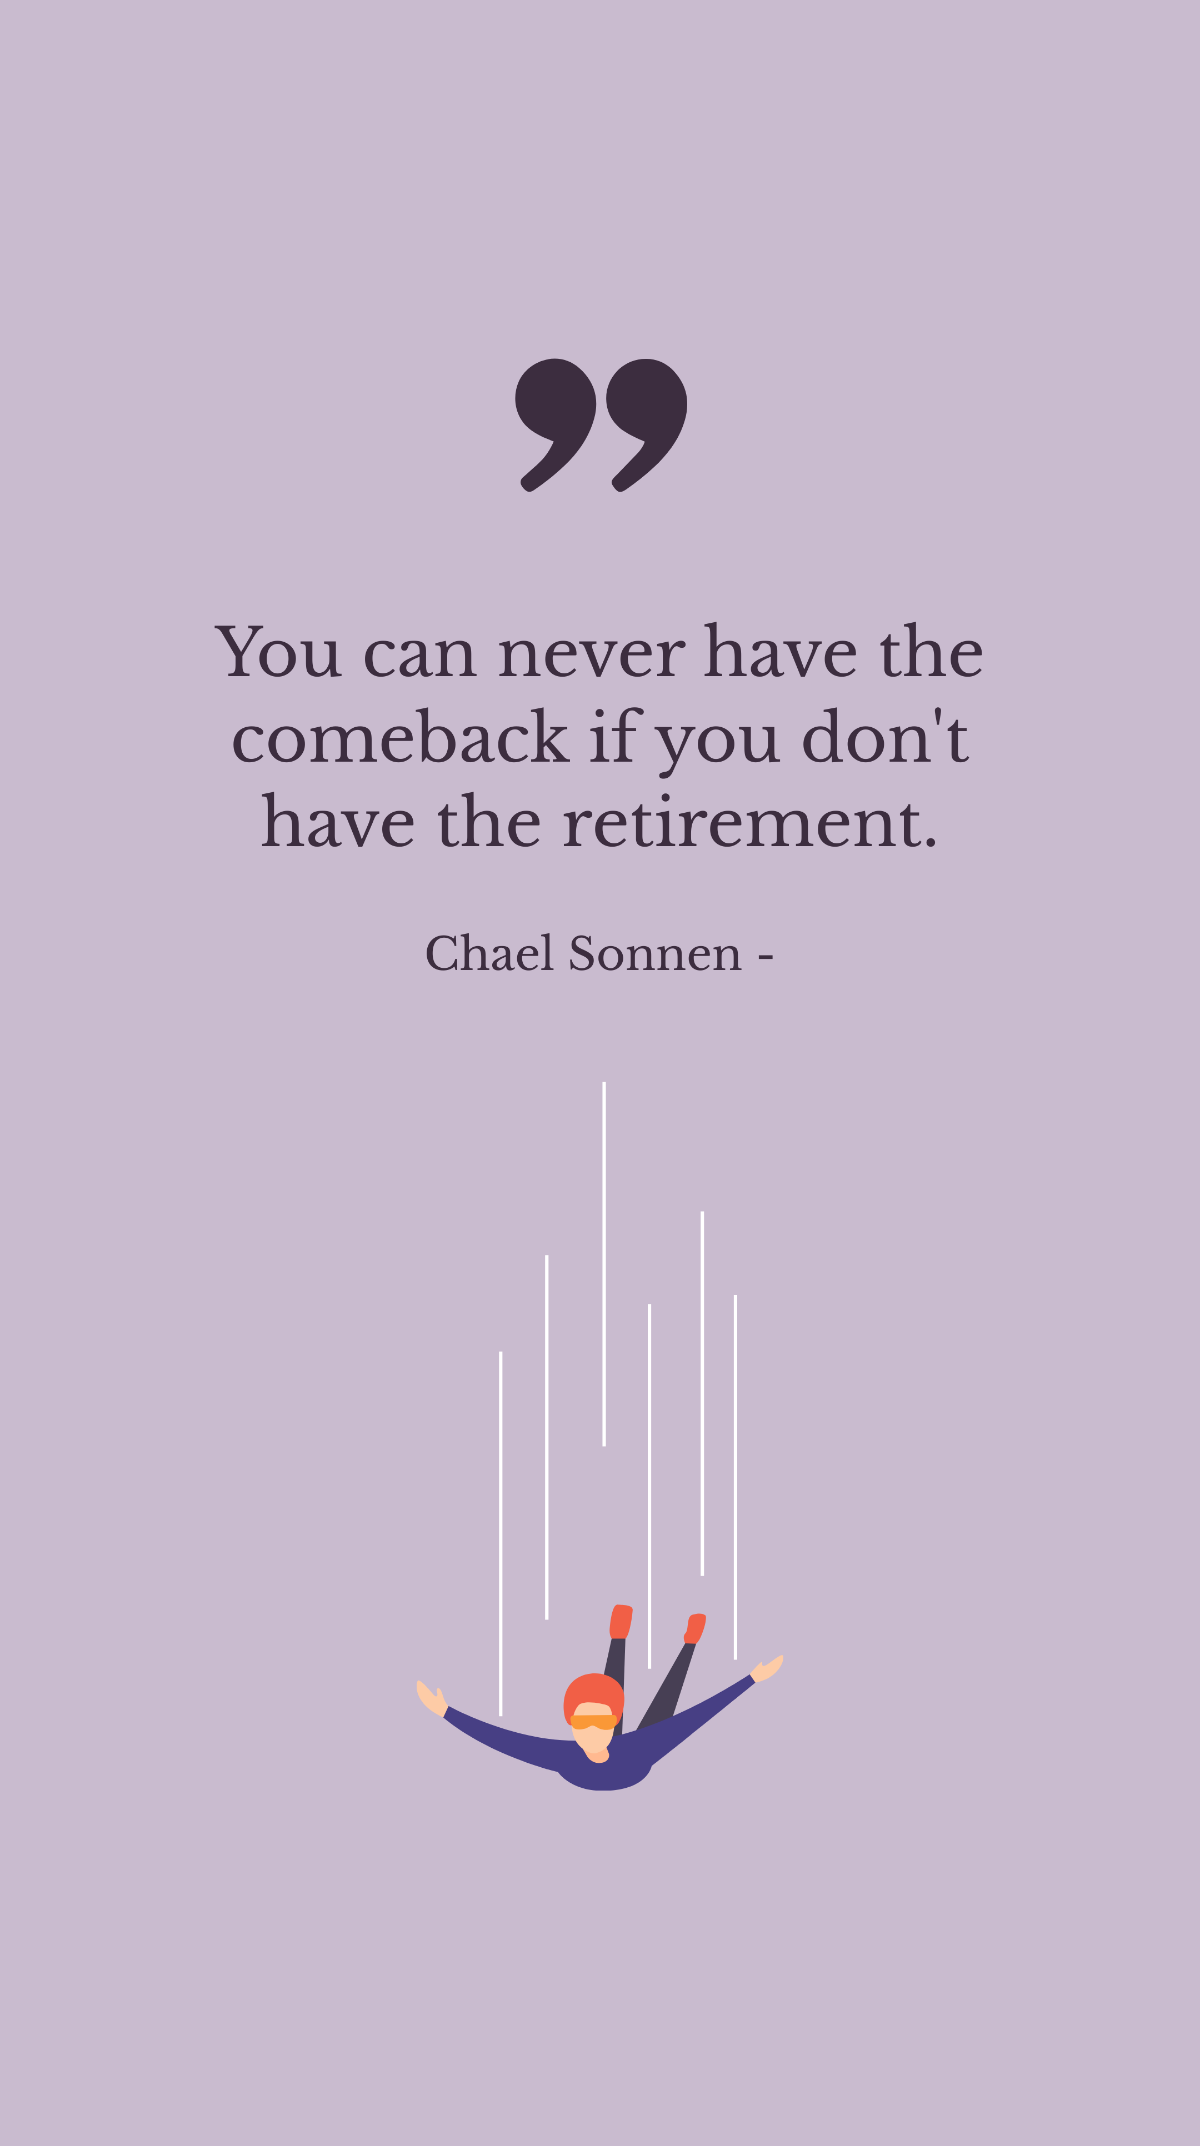 Free Chael Sonnen - You can never have the comeback if you don't have the retirement. Template